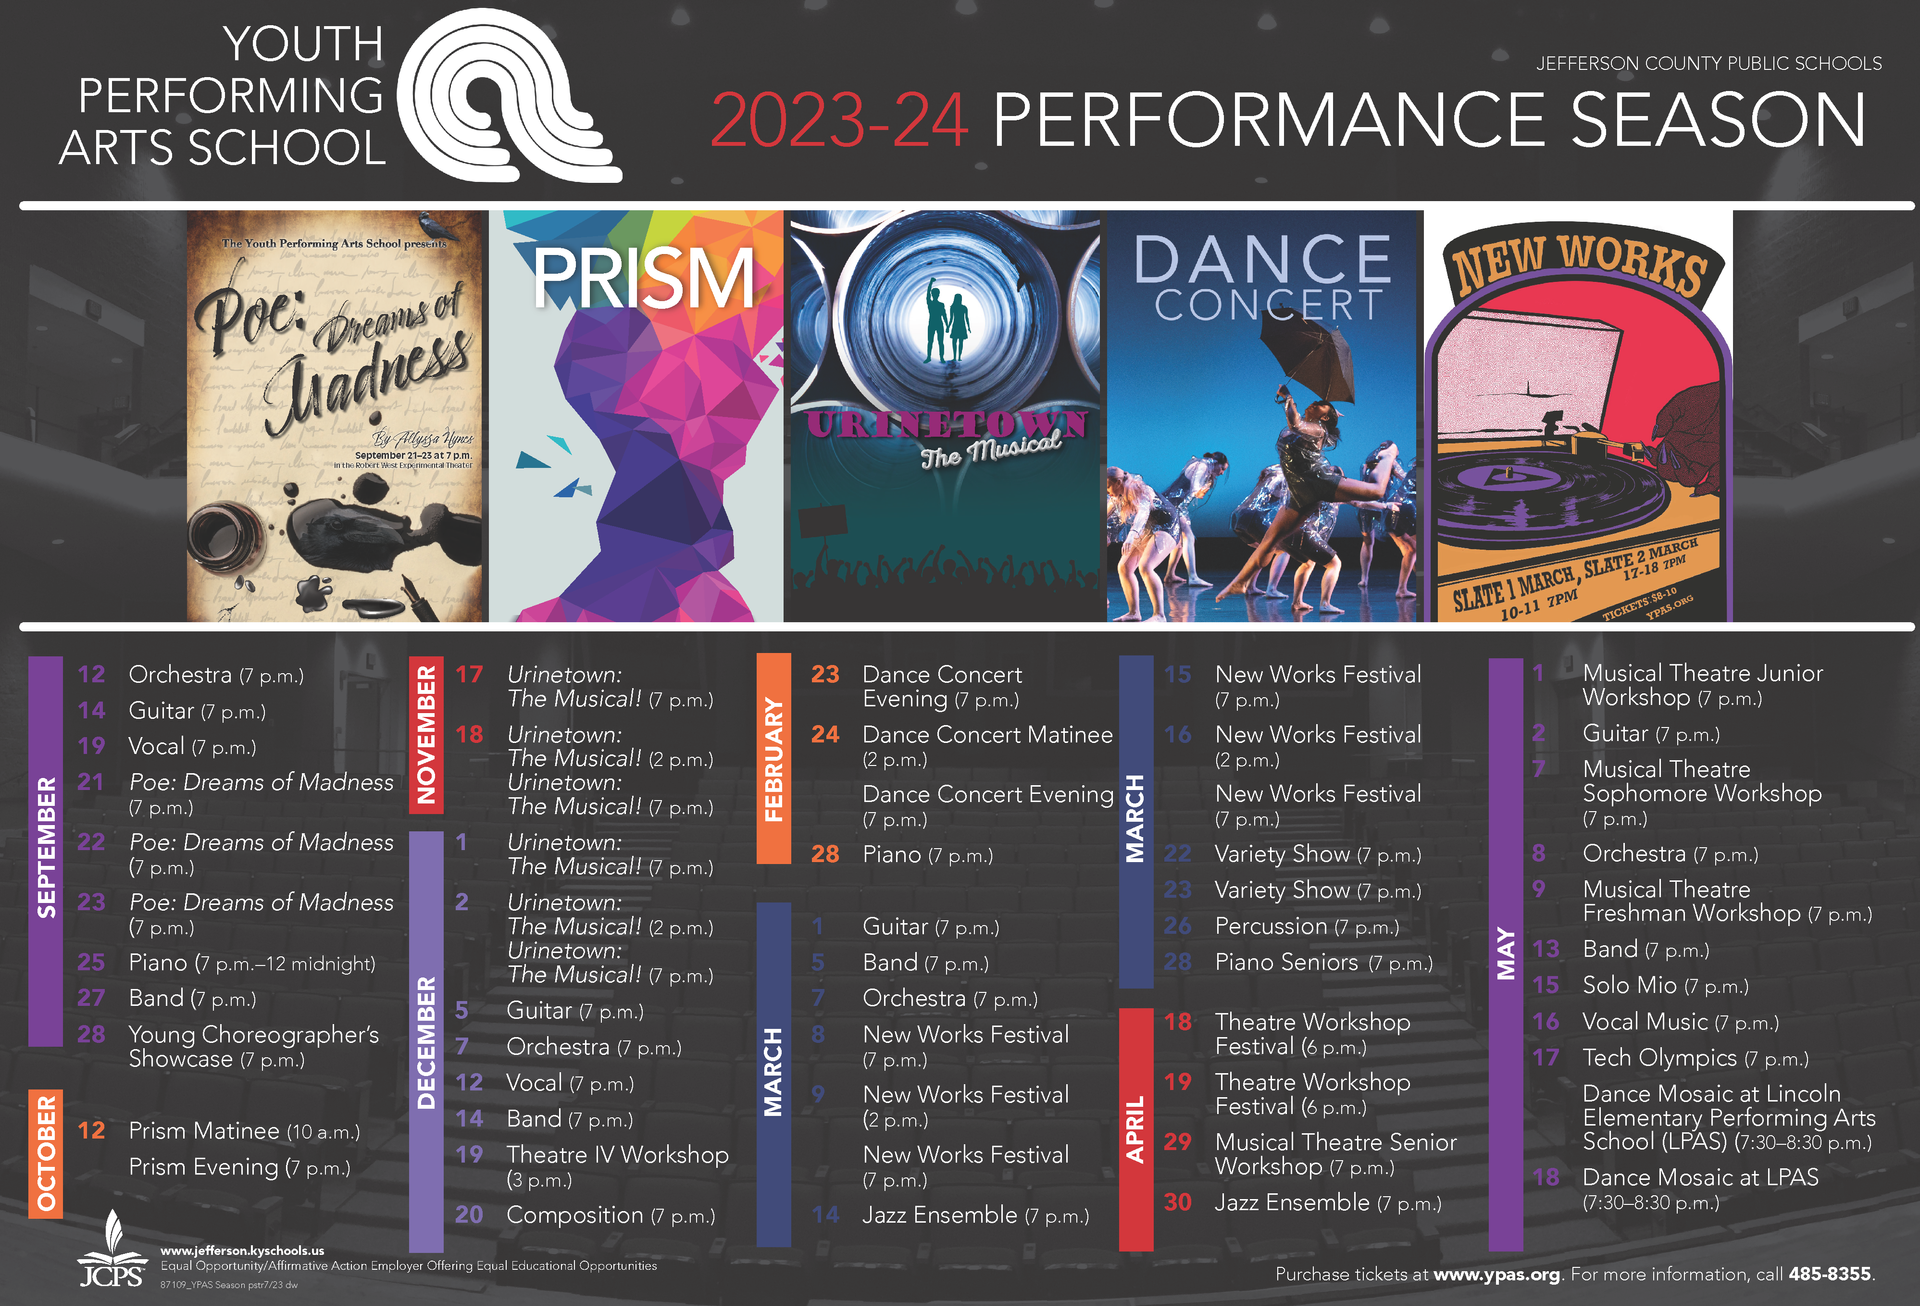 a poster for the 2023-24 performance season of youth performing arts school